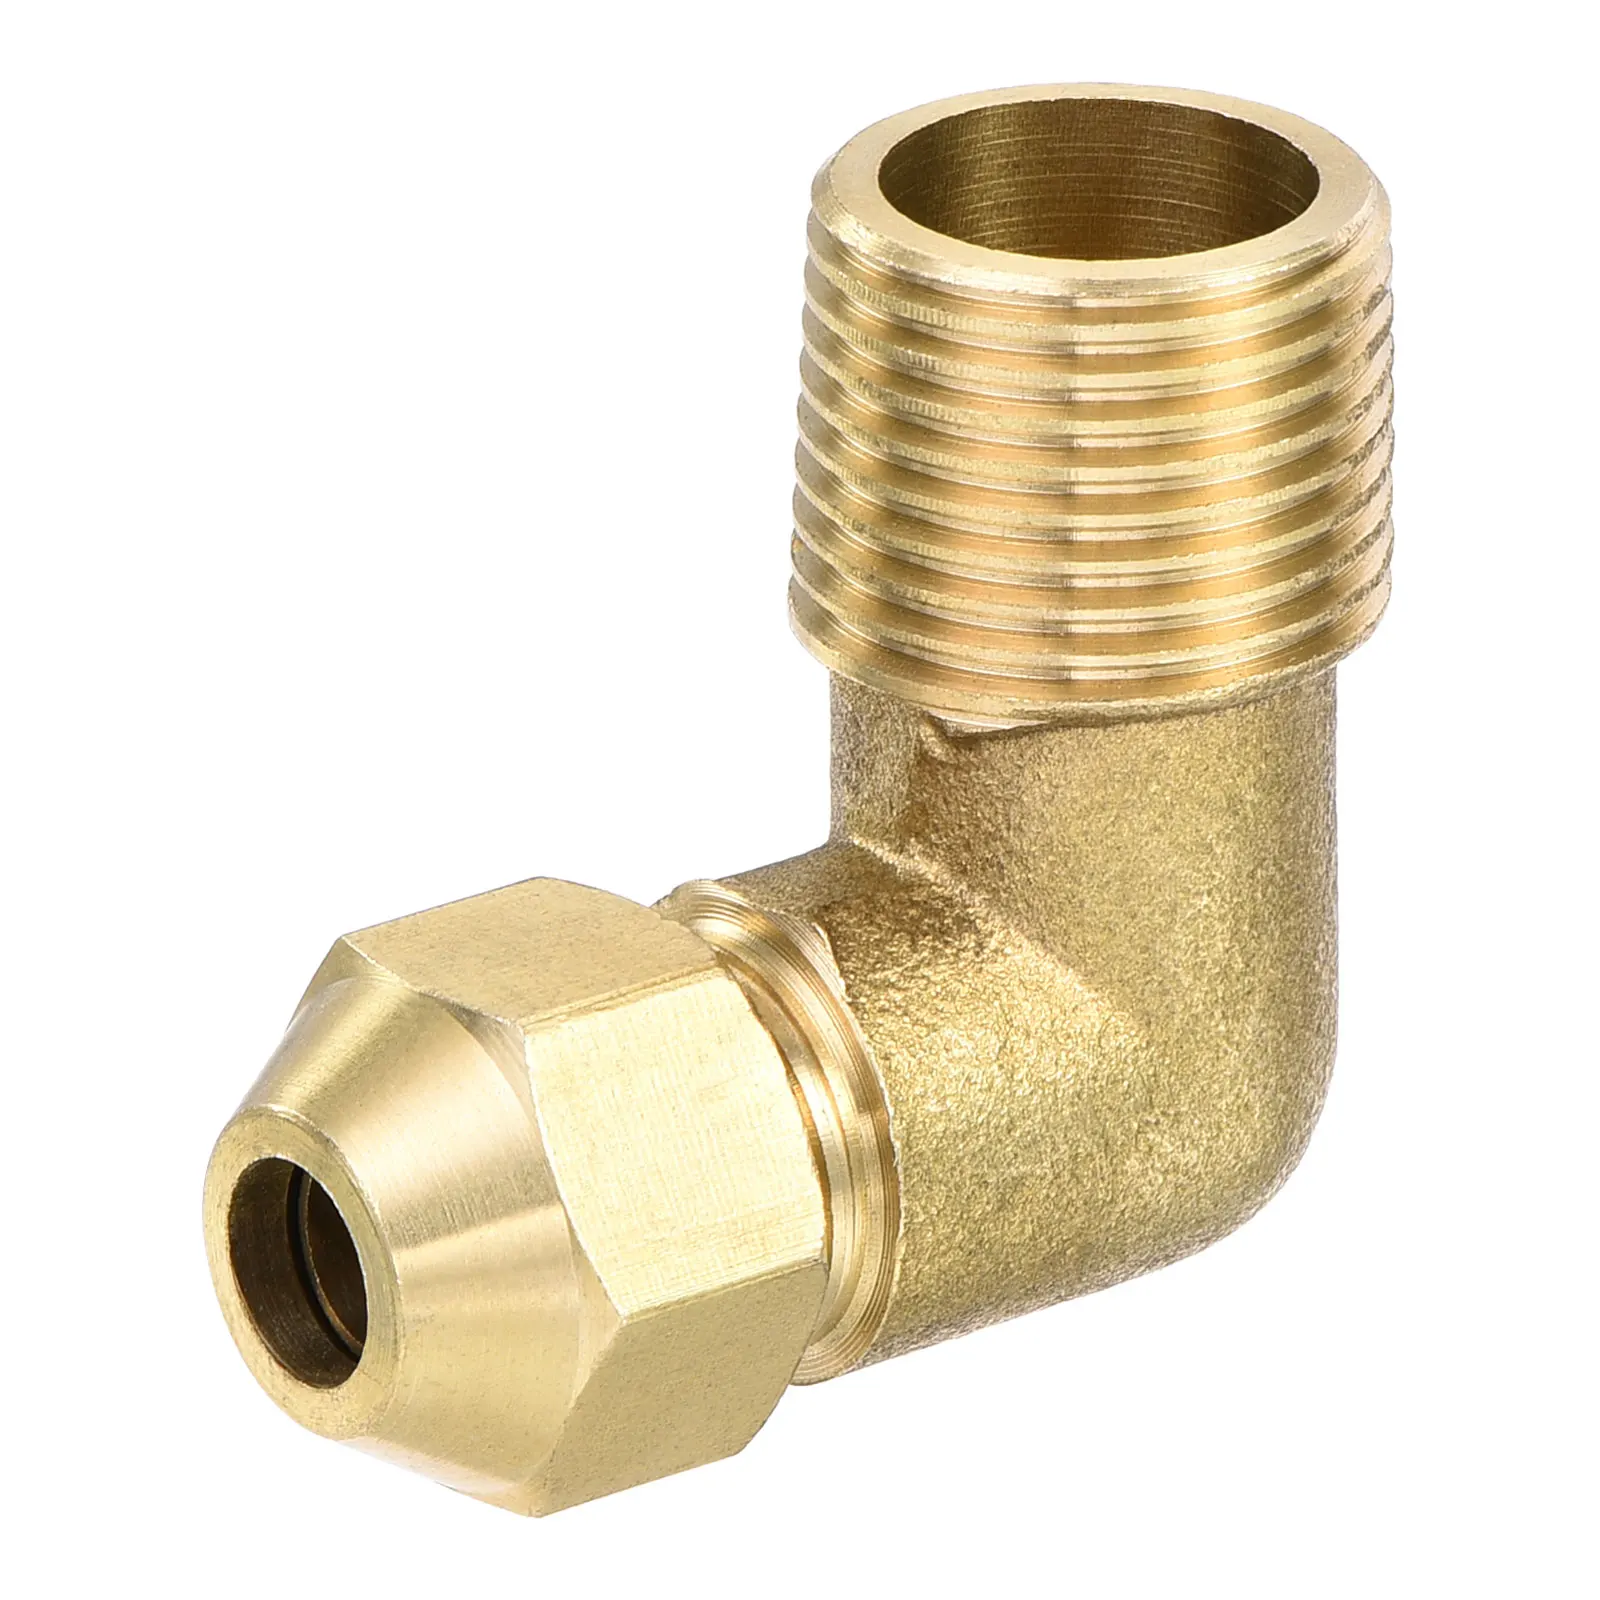 

Uxcell Brass Compression Tube Fitting 6mm Tube OD to 3/8PT Male Thread Elbow Fittings Pack of 1